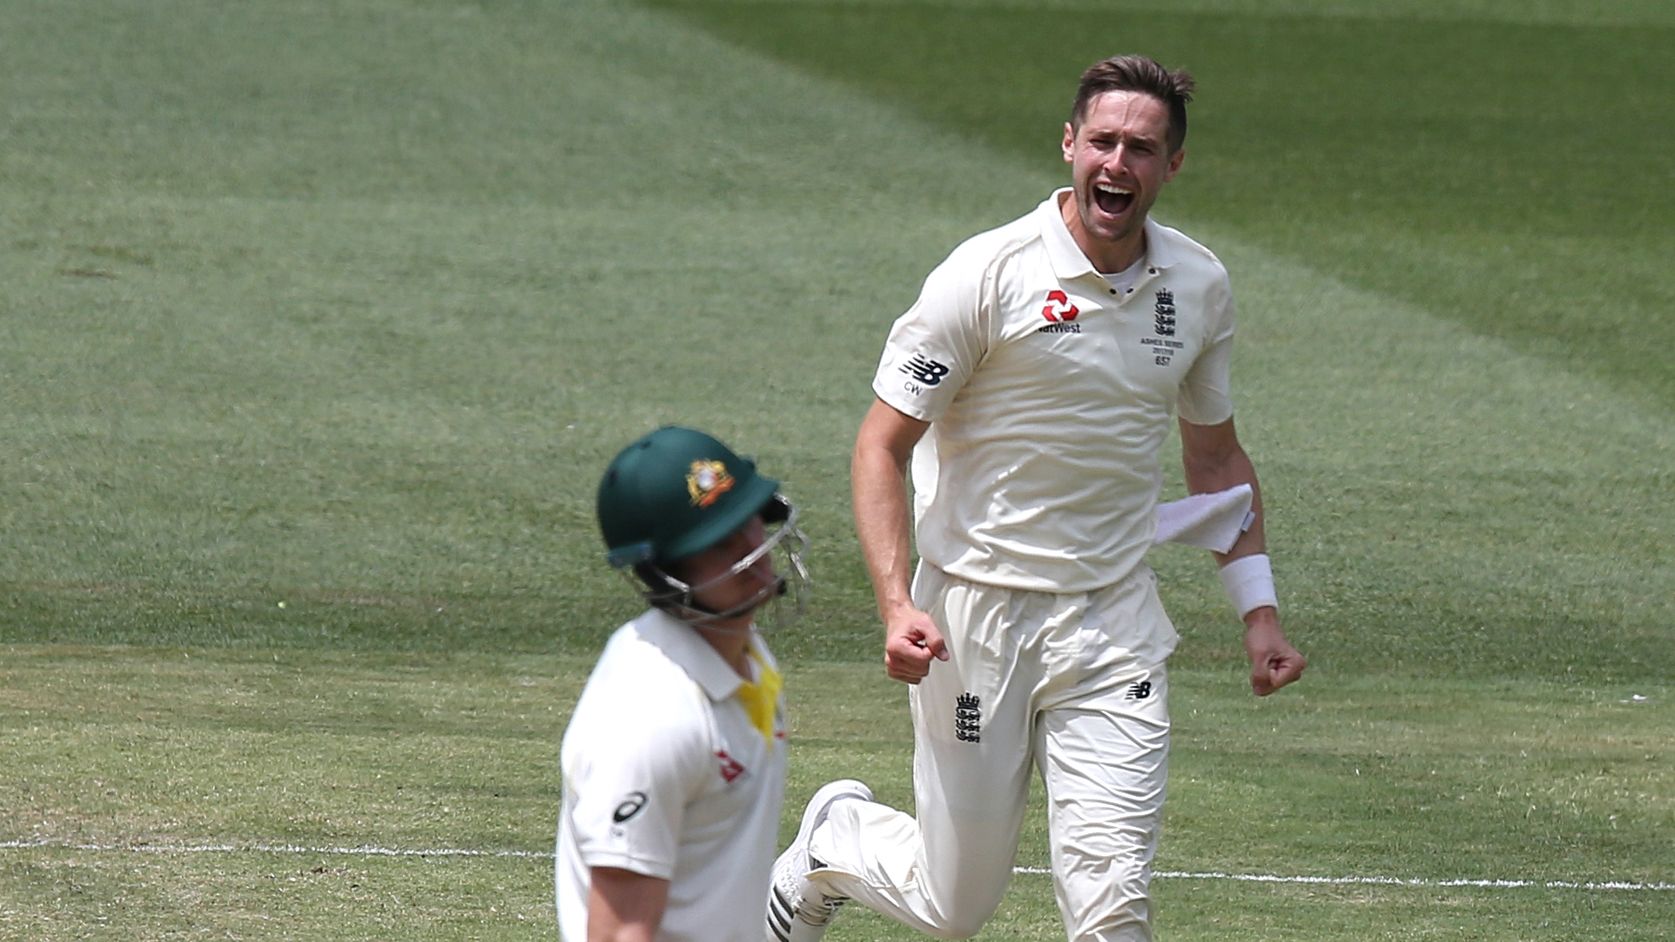 Chris Woakes bowls Cameron Bancroft and lets the Aussie know about it.